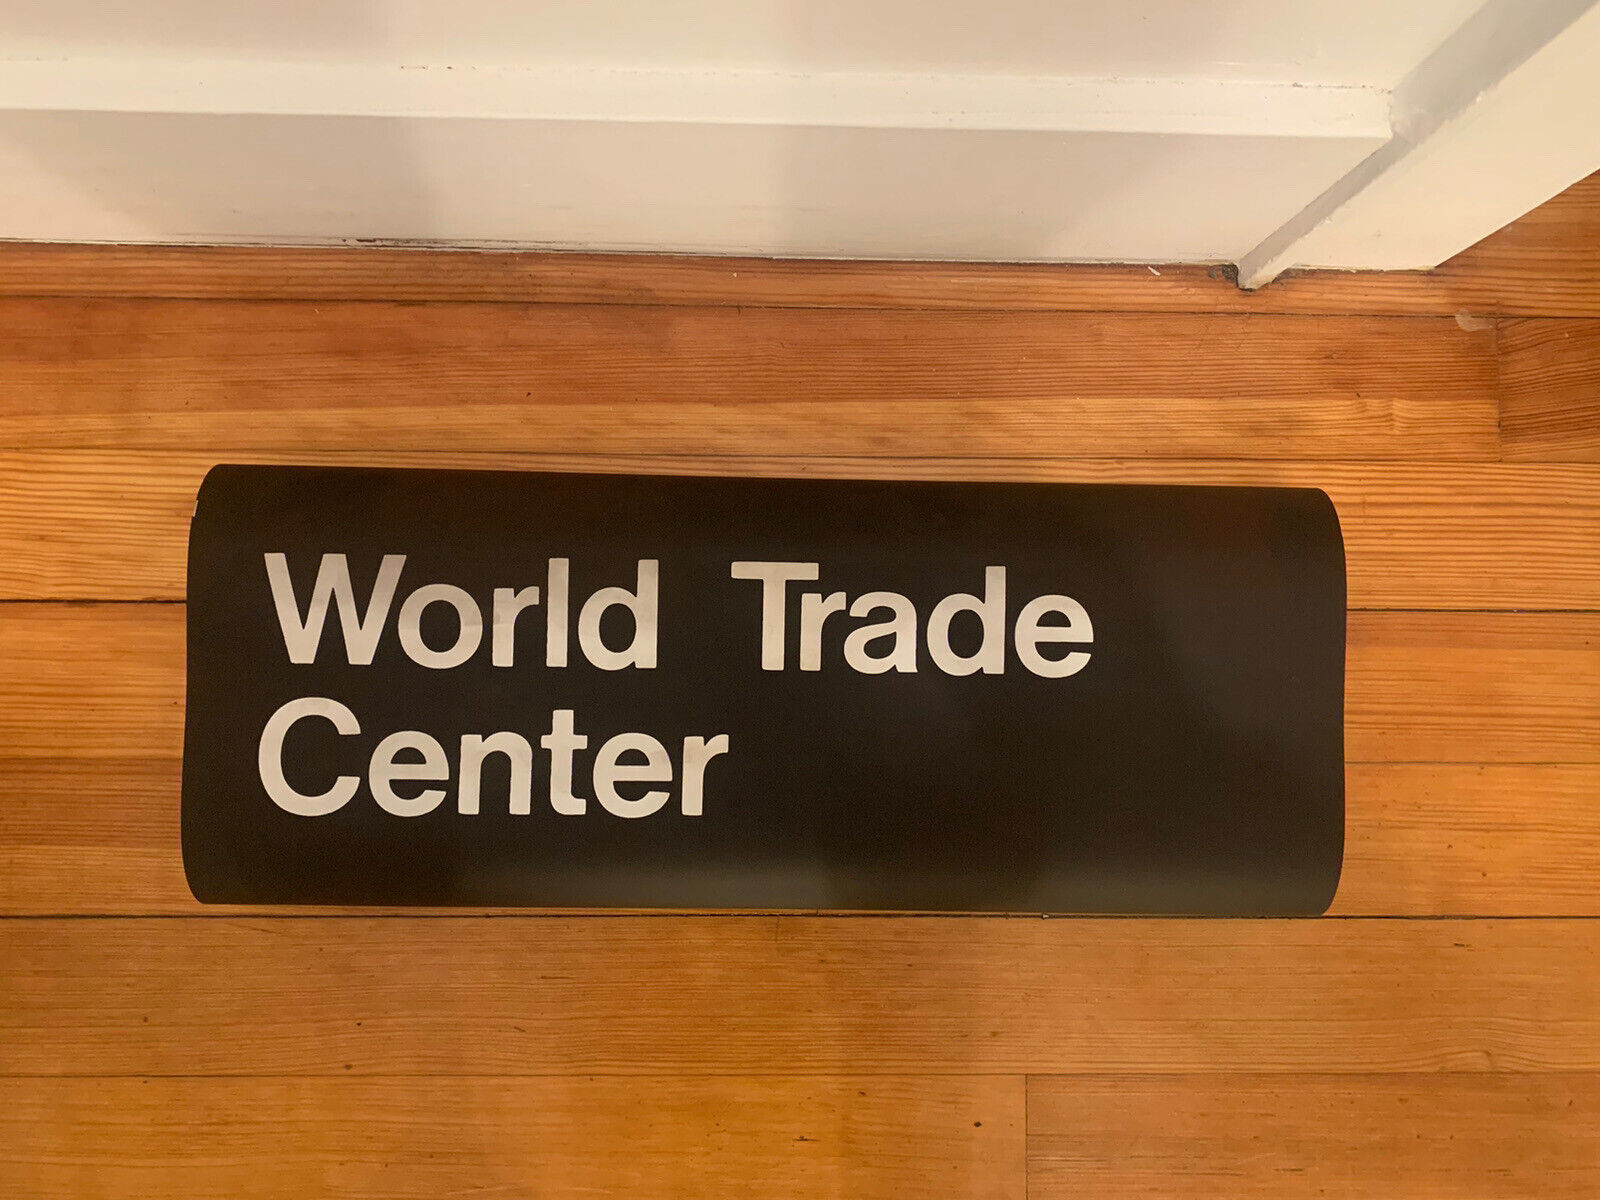 NY NYC SUBWAY 2 LINE ROLL SIGN WORLD TRADE CENTER FINANCIAL DISTRICT HISTORICAL